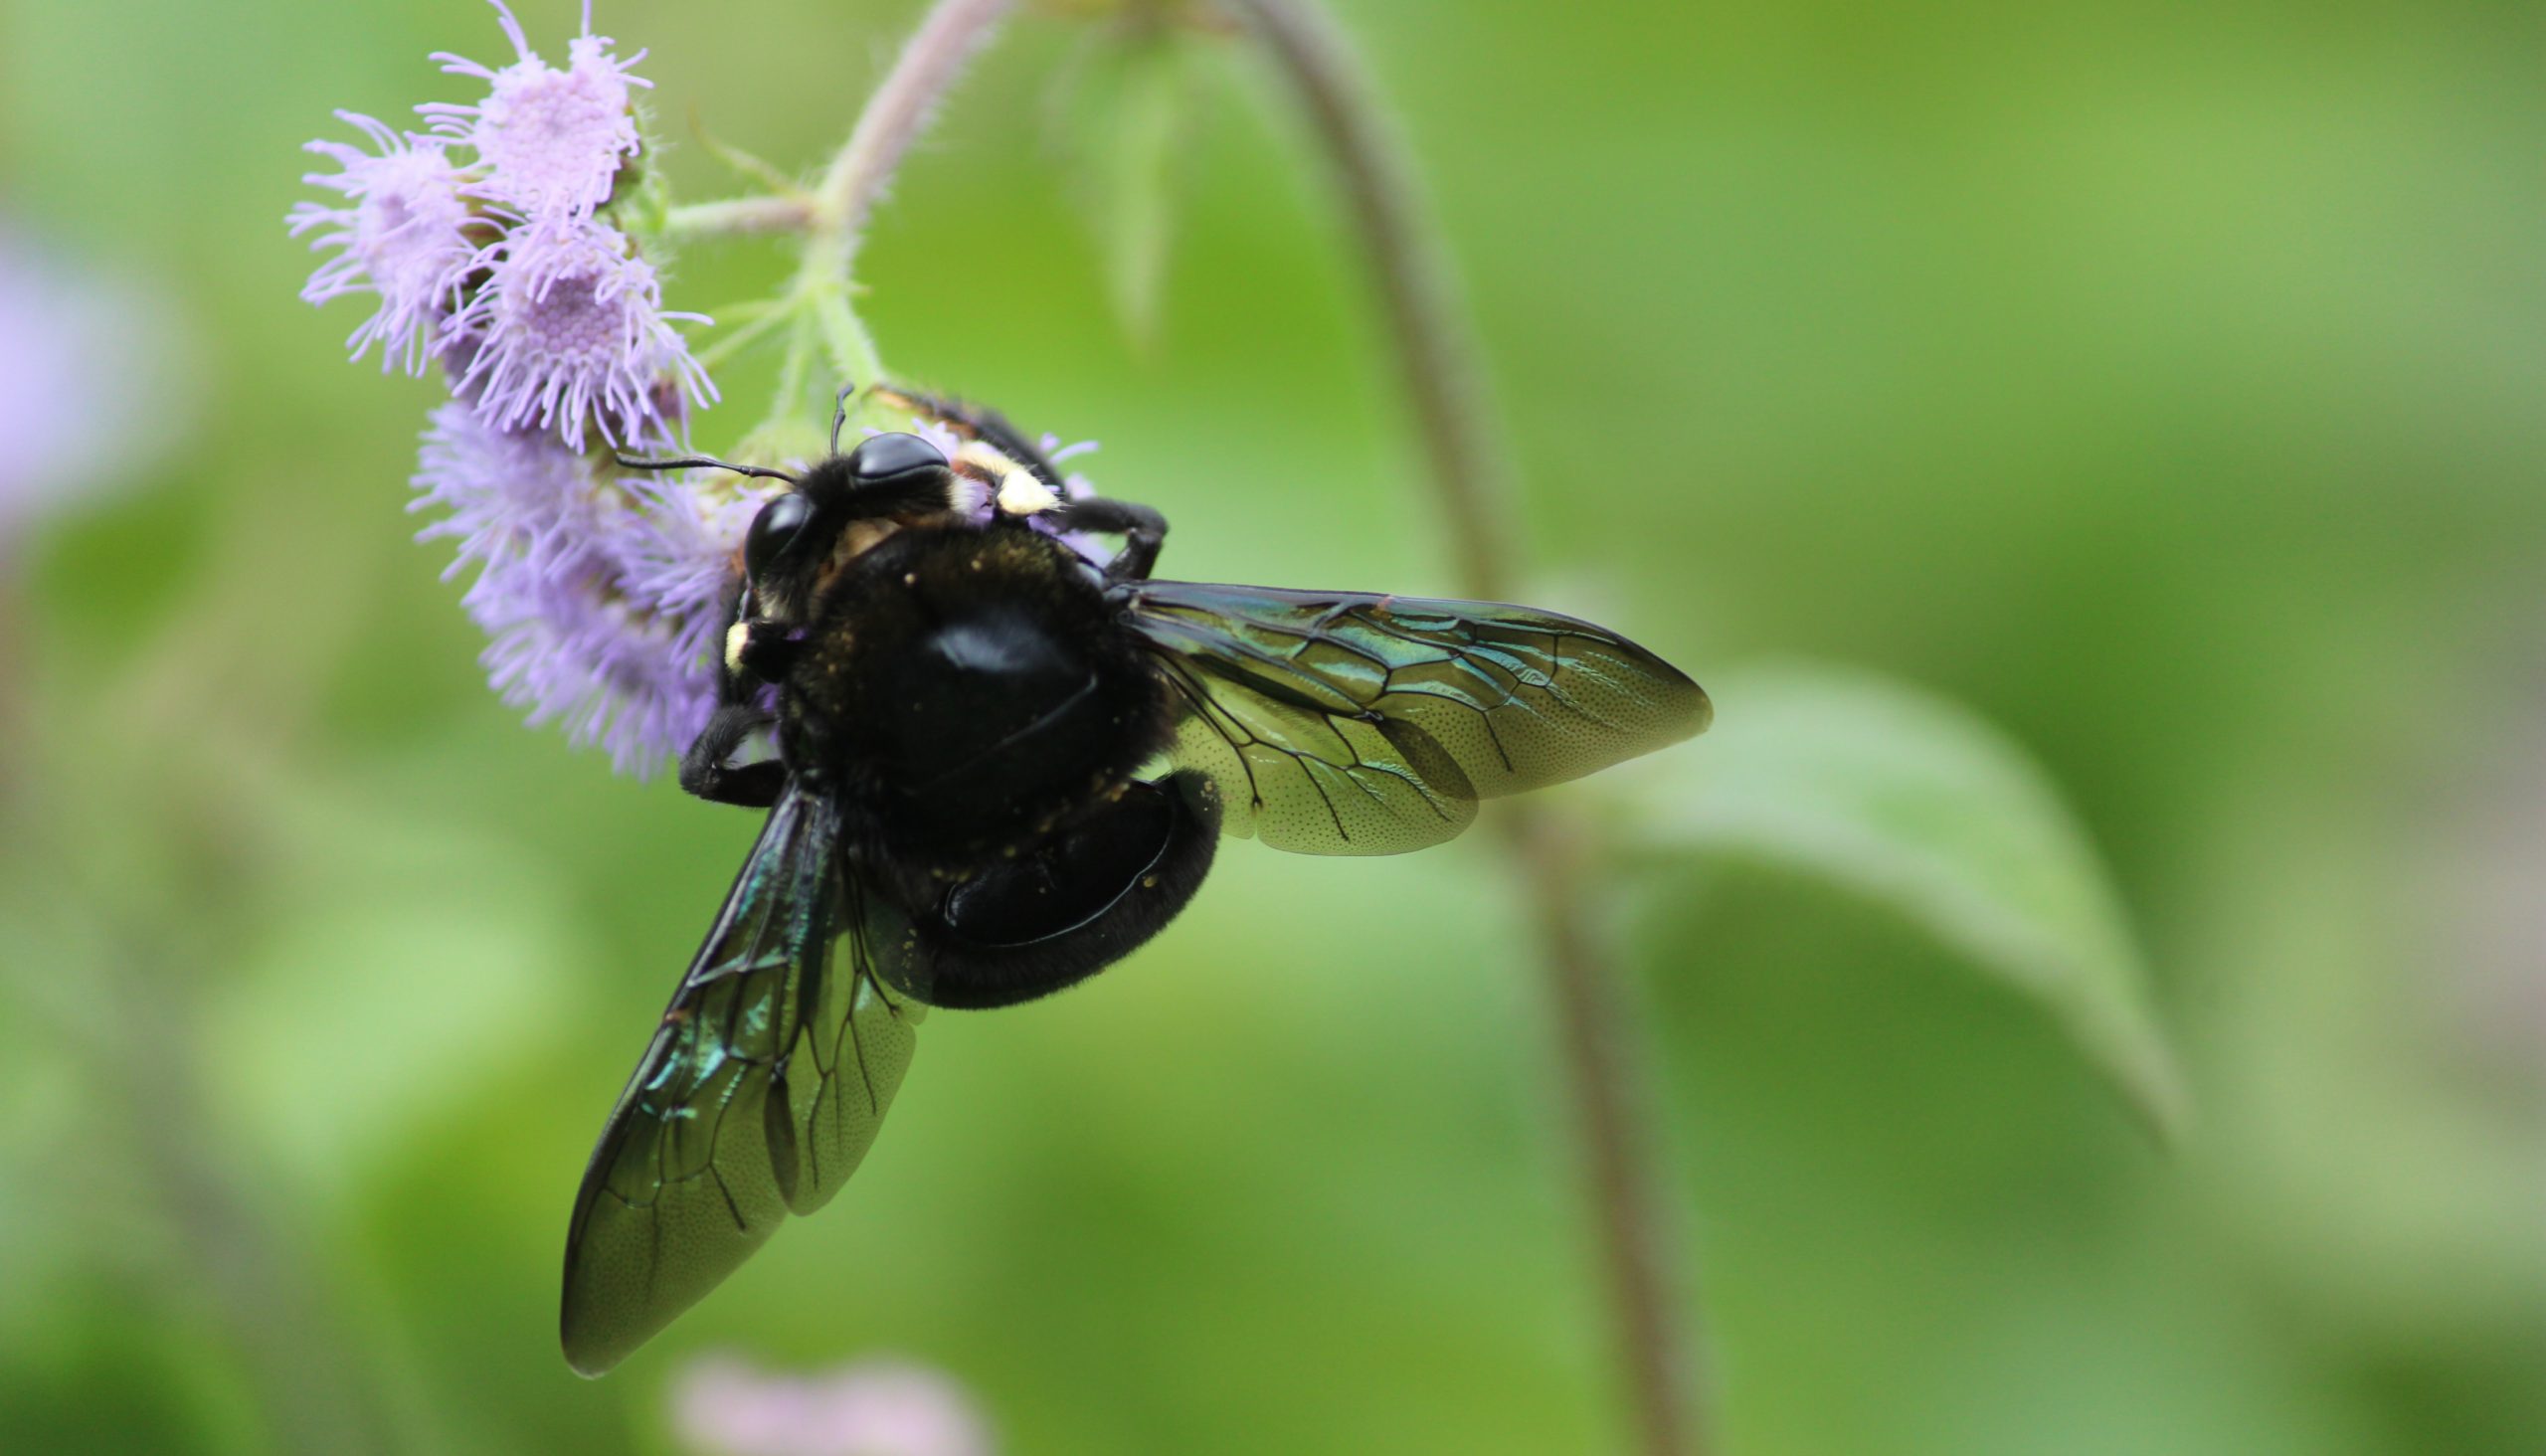 Southern carpenter bee in a Flower on Focus